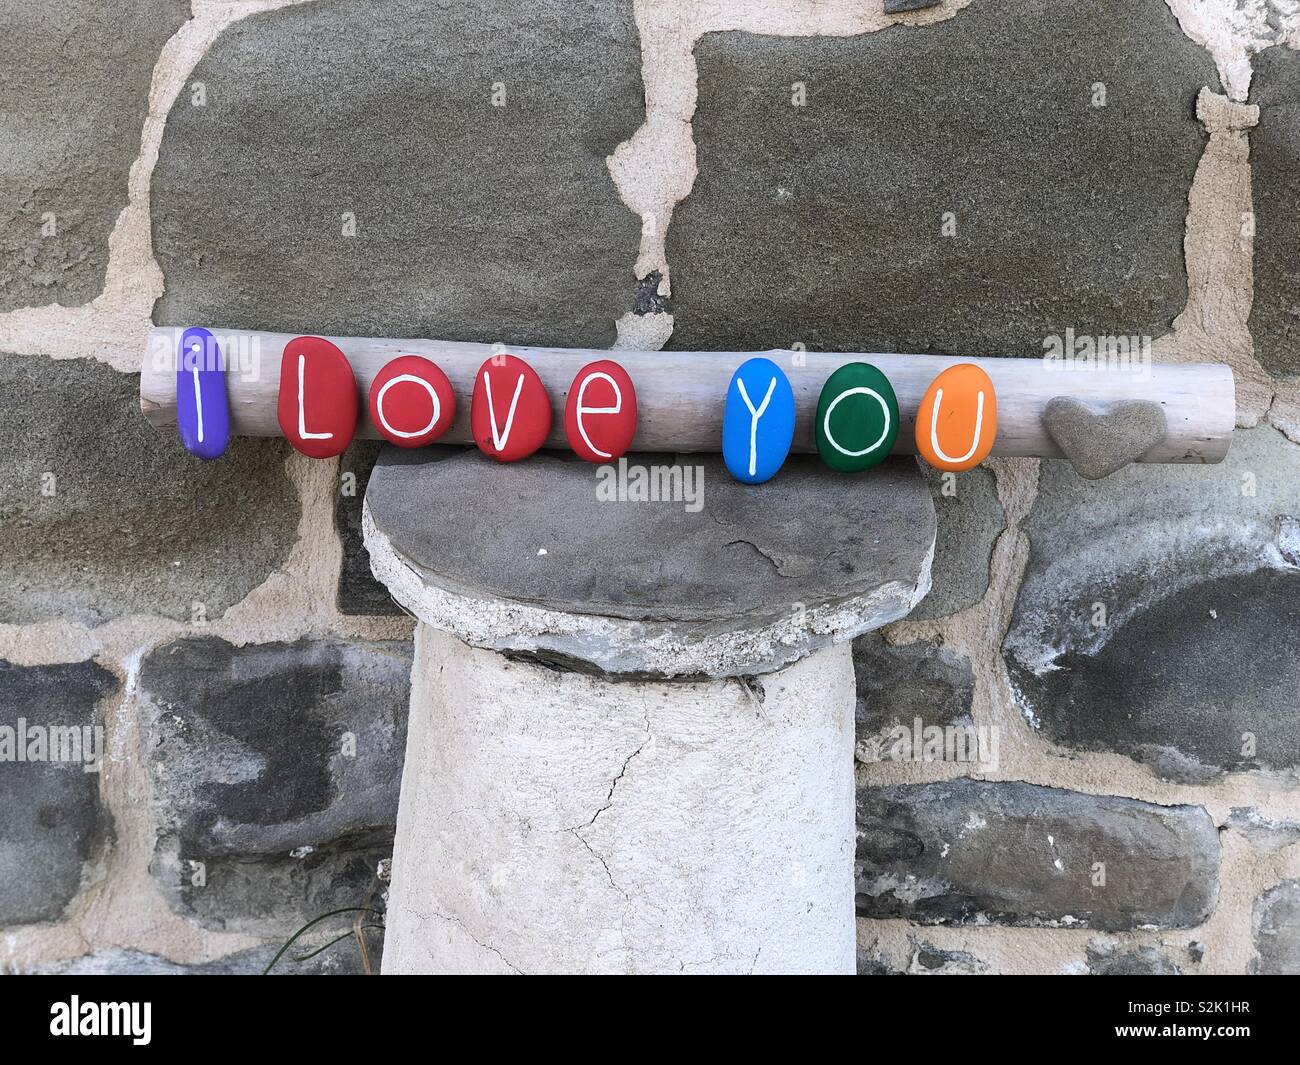 I love you message with colored stones Stock Photo